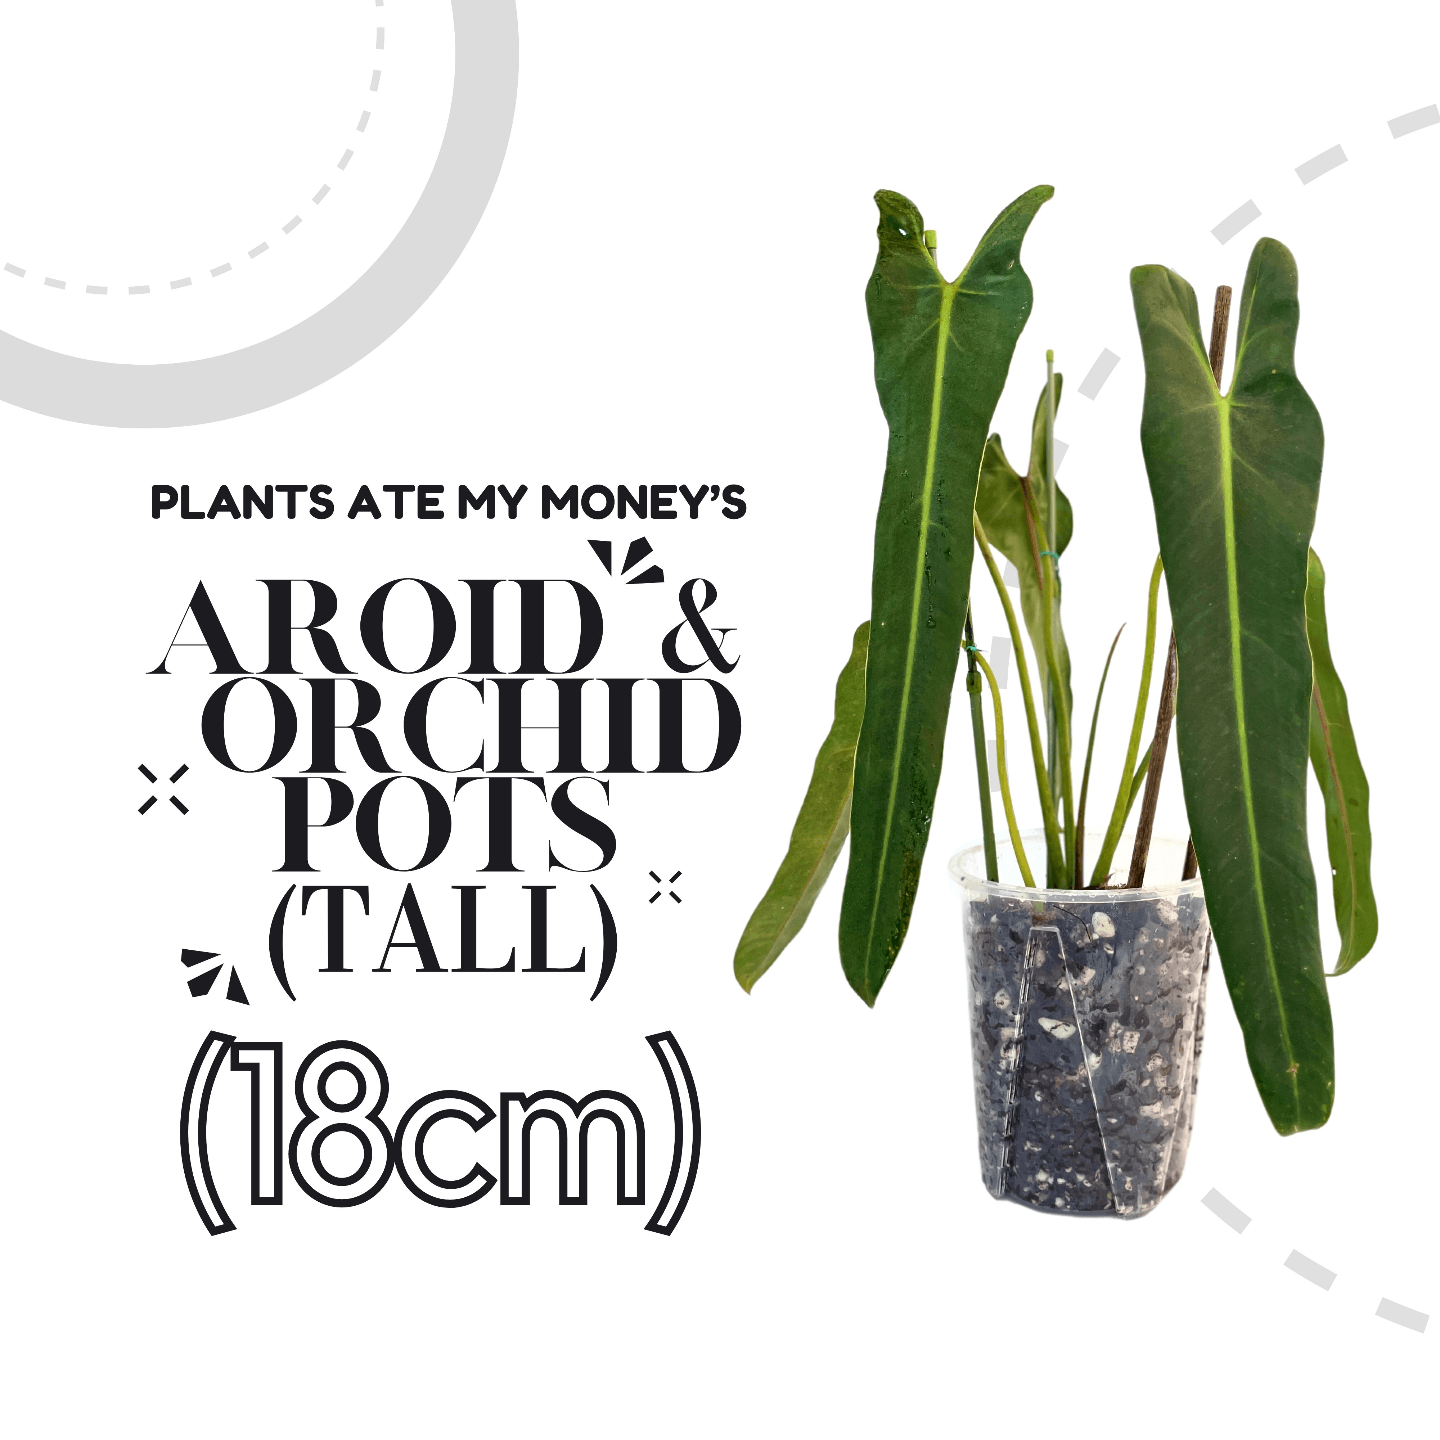 TALL 18cm Aroid & Orchid Pot